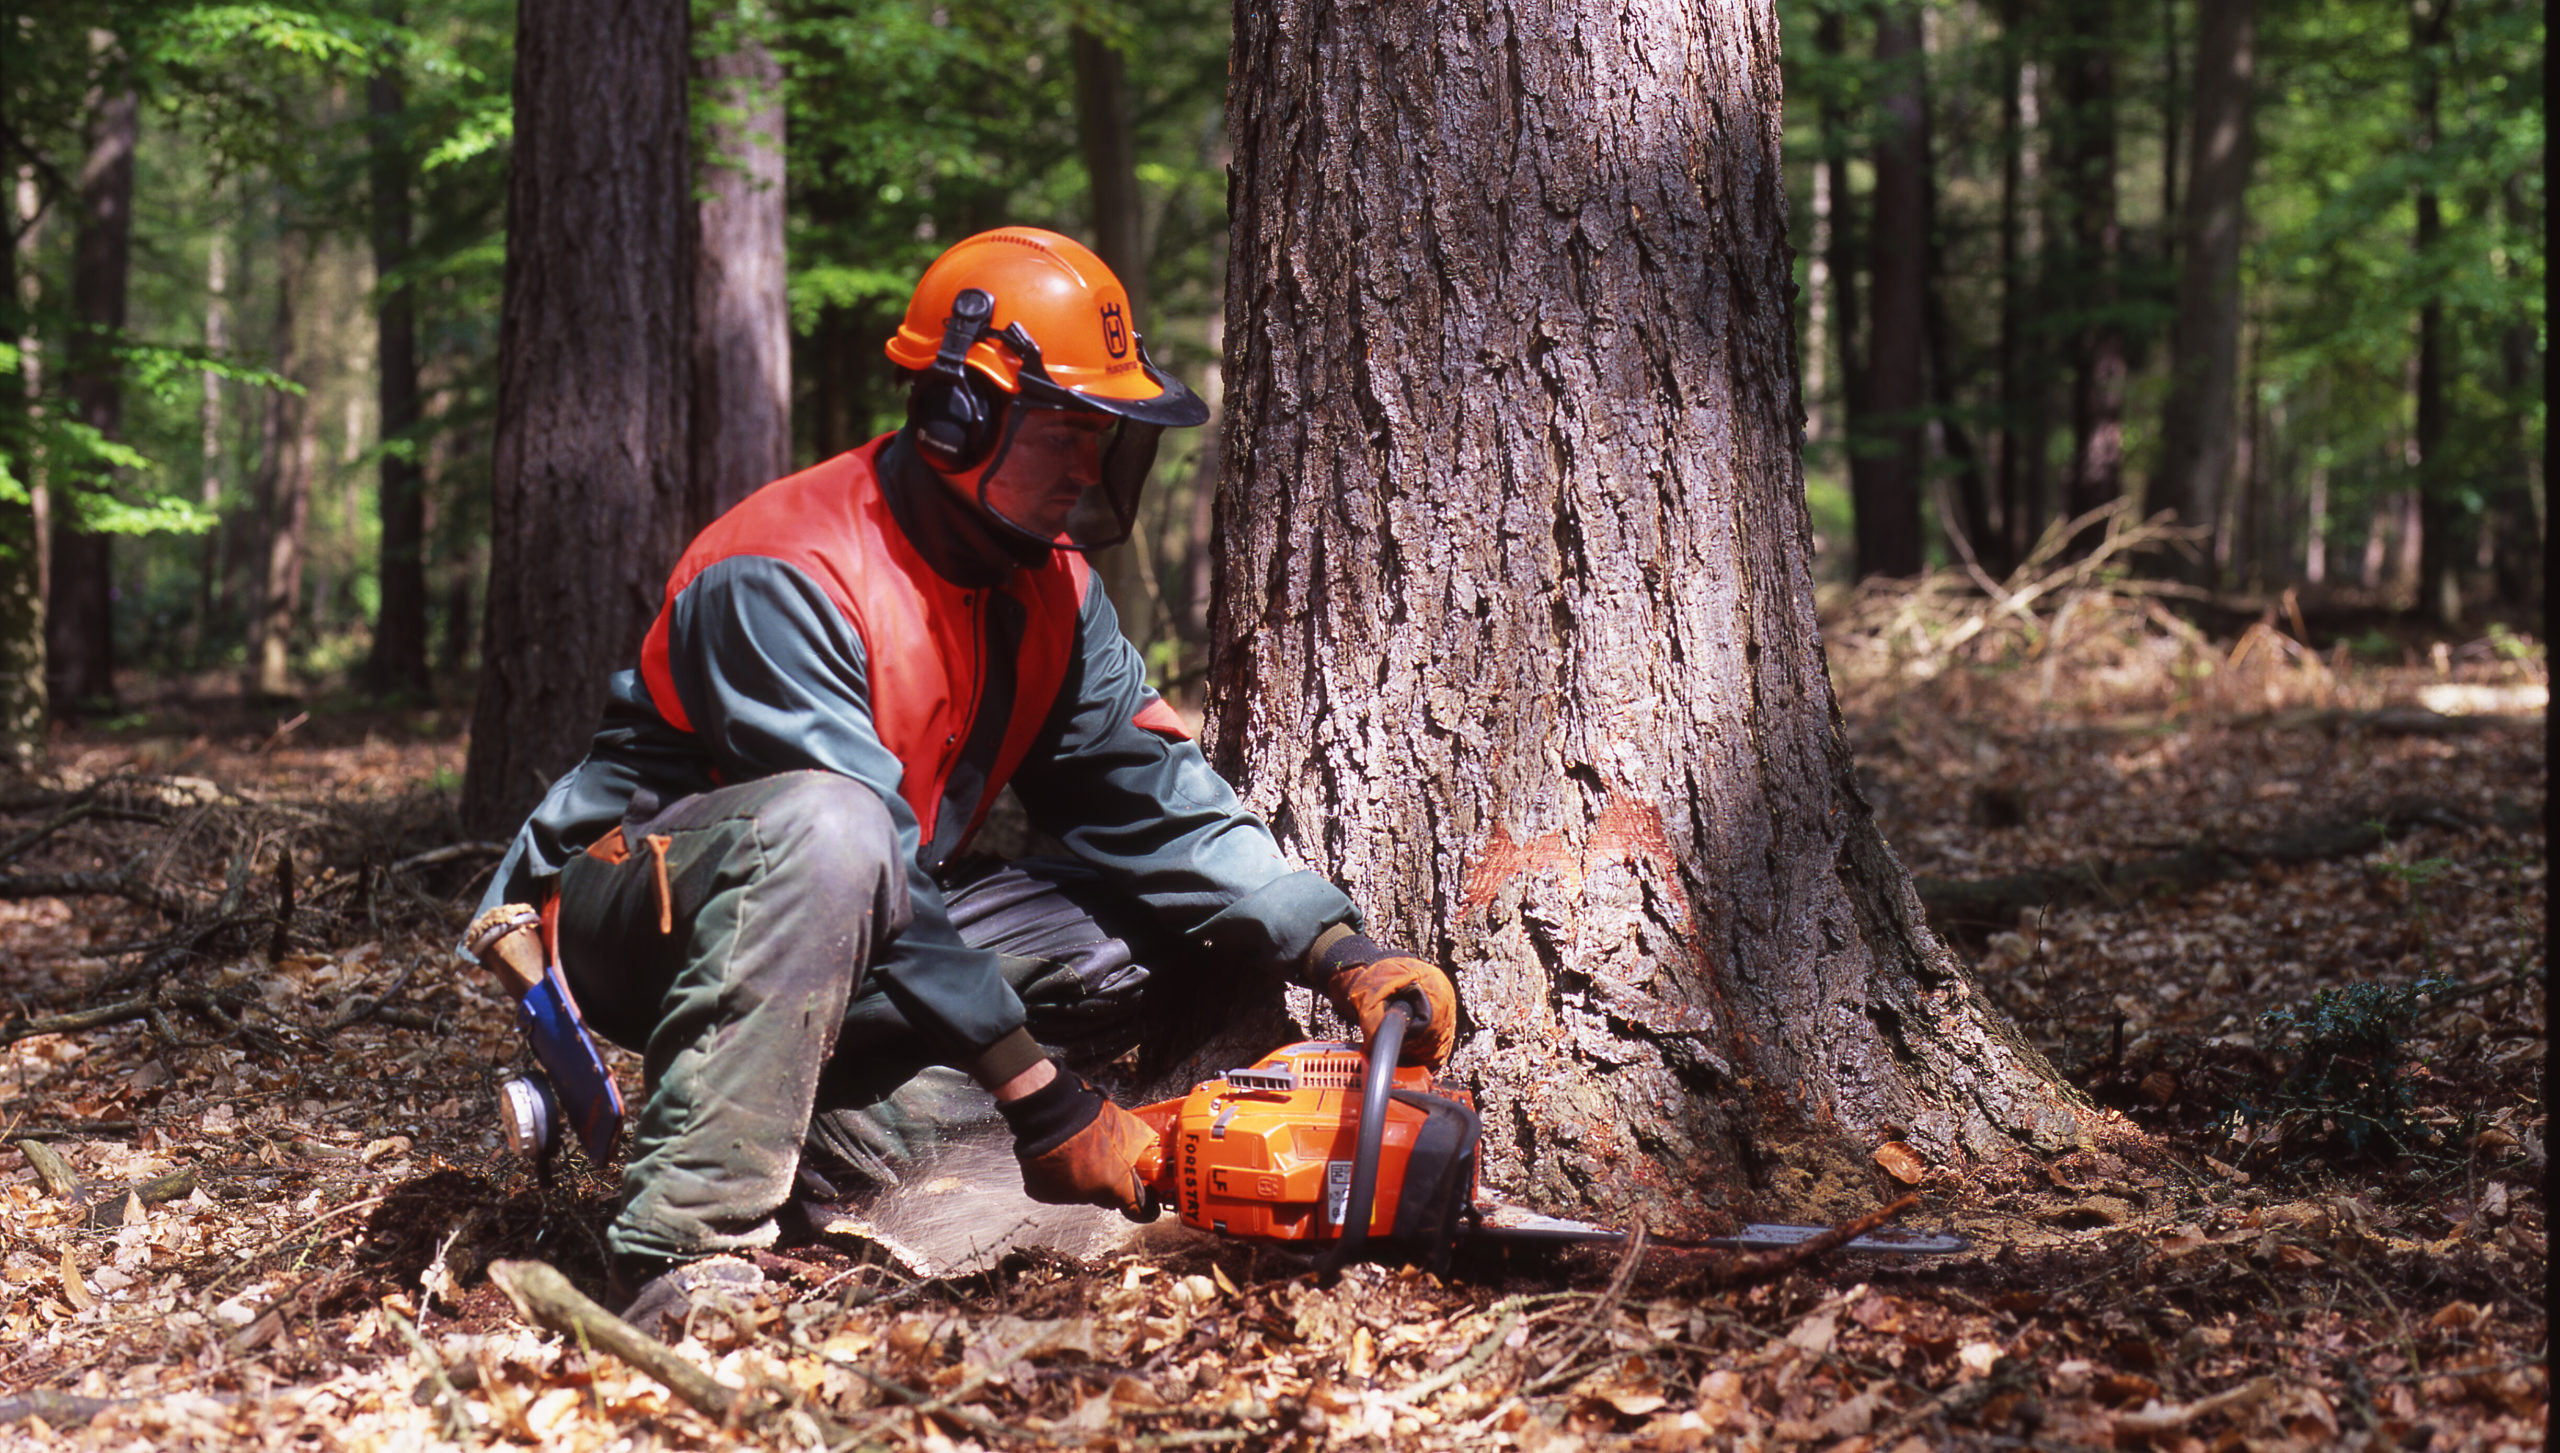 An Arboriculturalist in protective wear, cutting a tree.